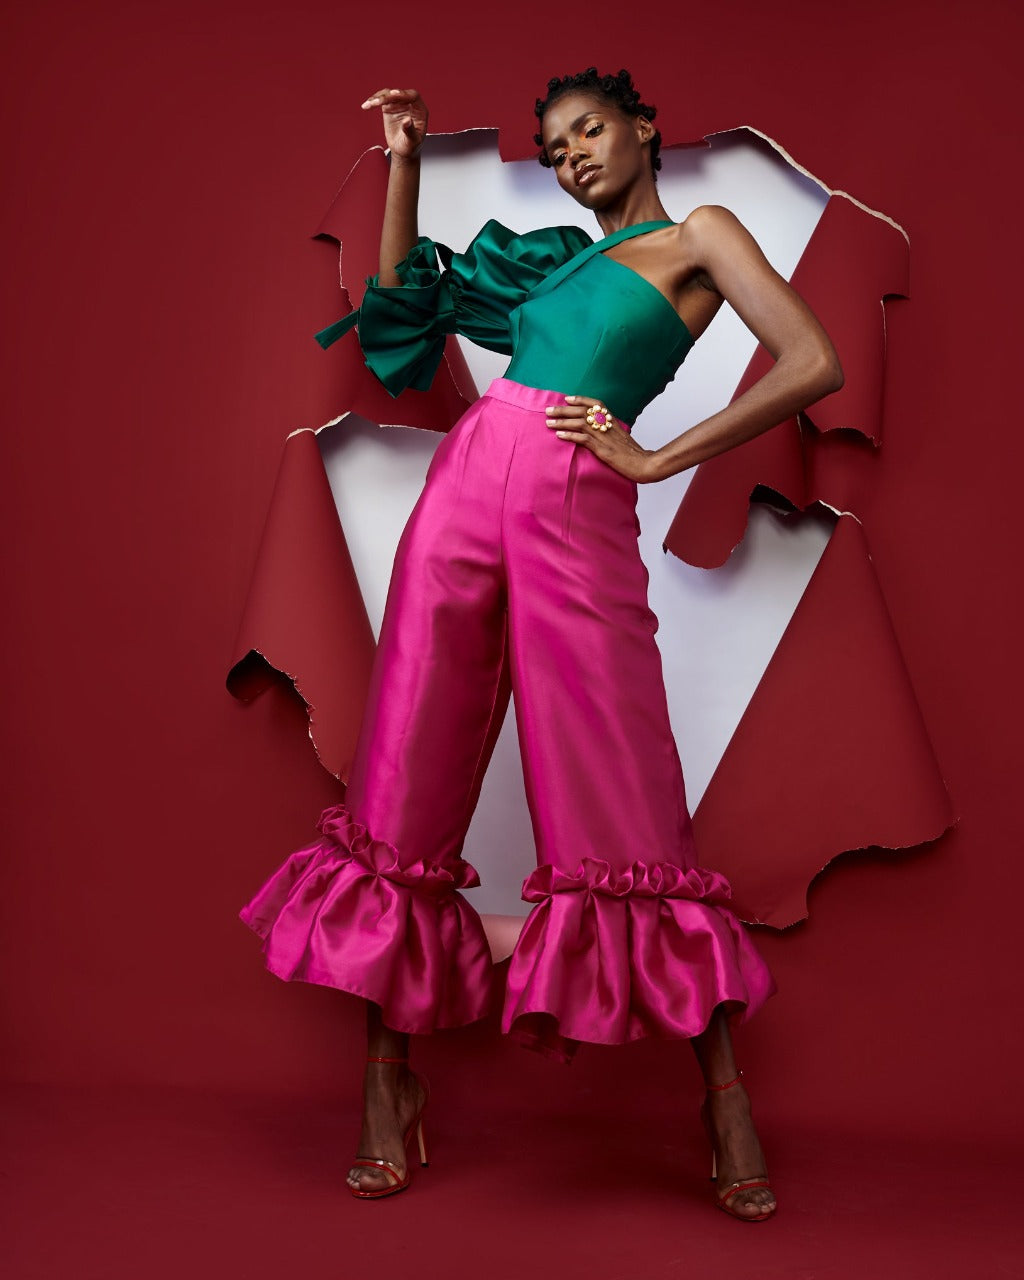 A model posing wearing a silk satin green top and magenta pants in a red room